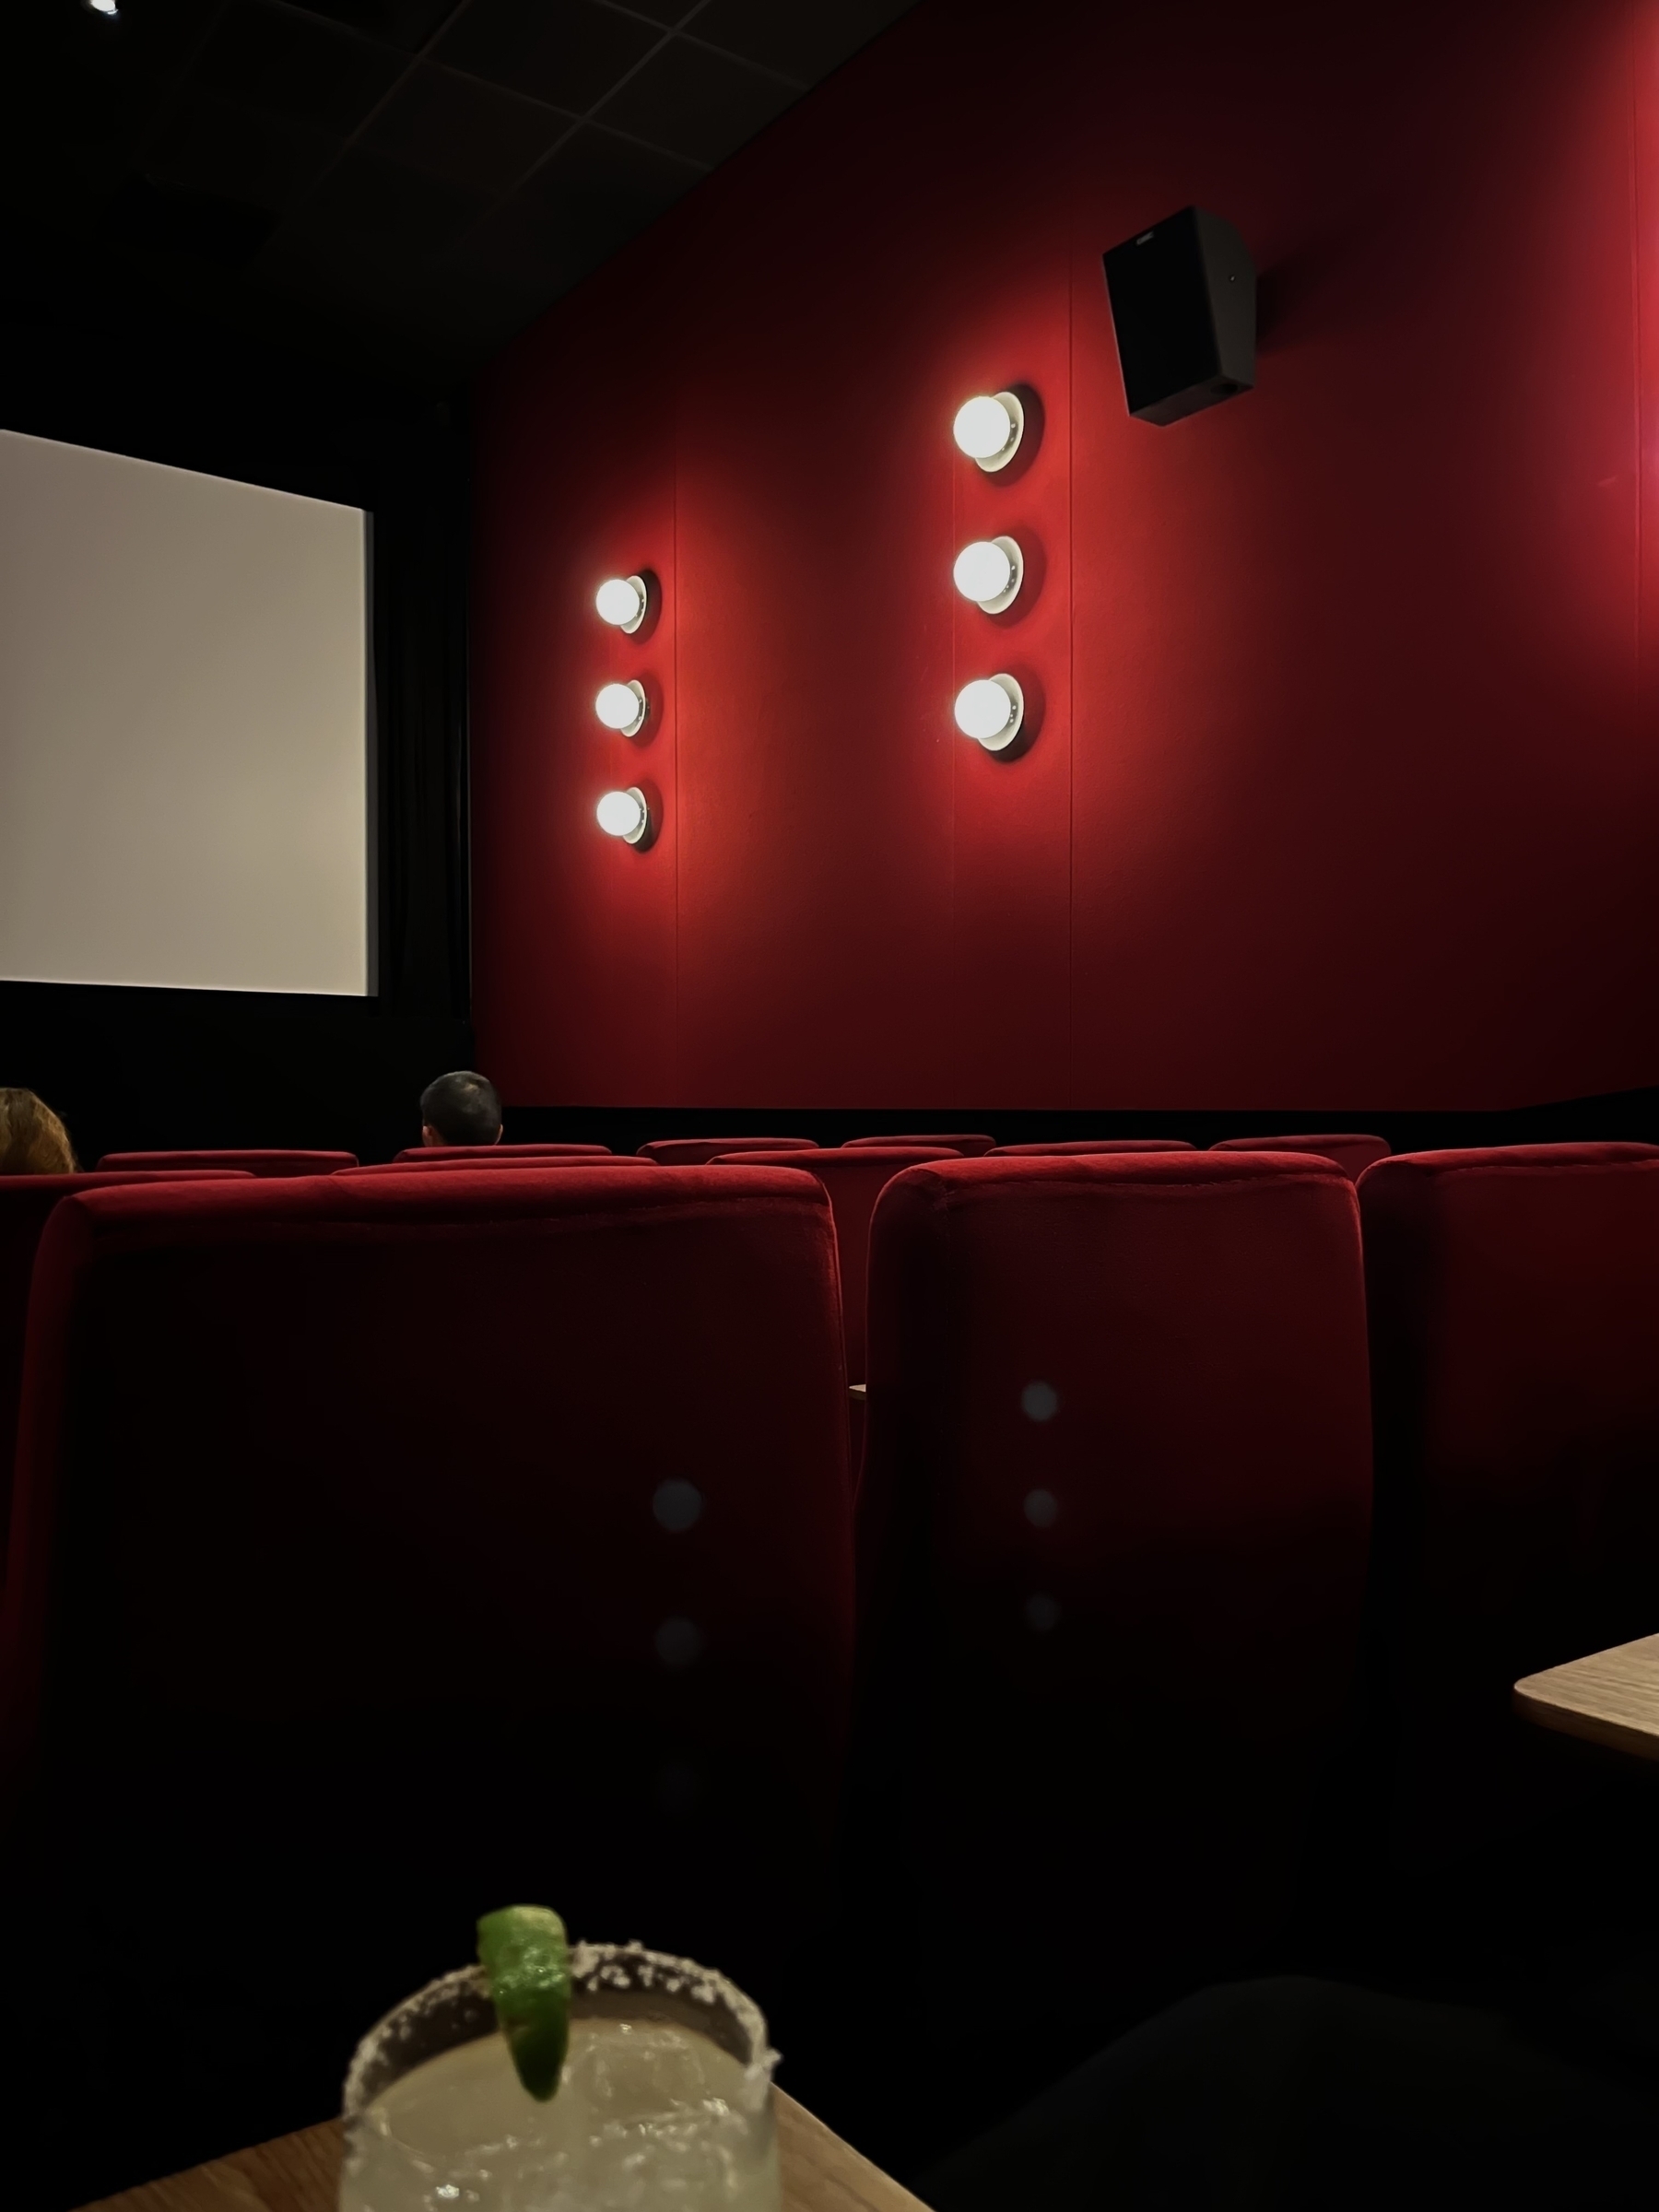 Cinema room with bright red walls and bright lights, can be seen  from a red velvet seat